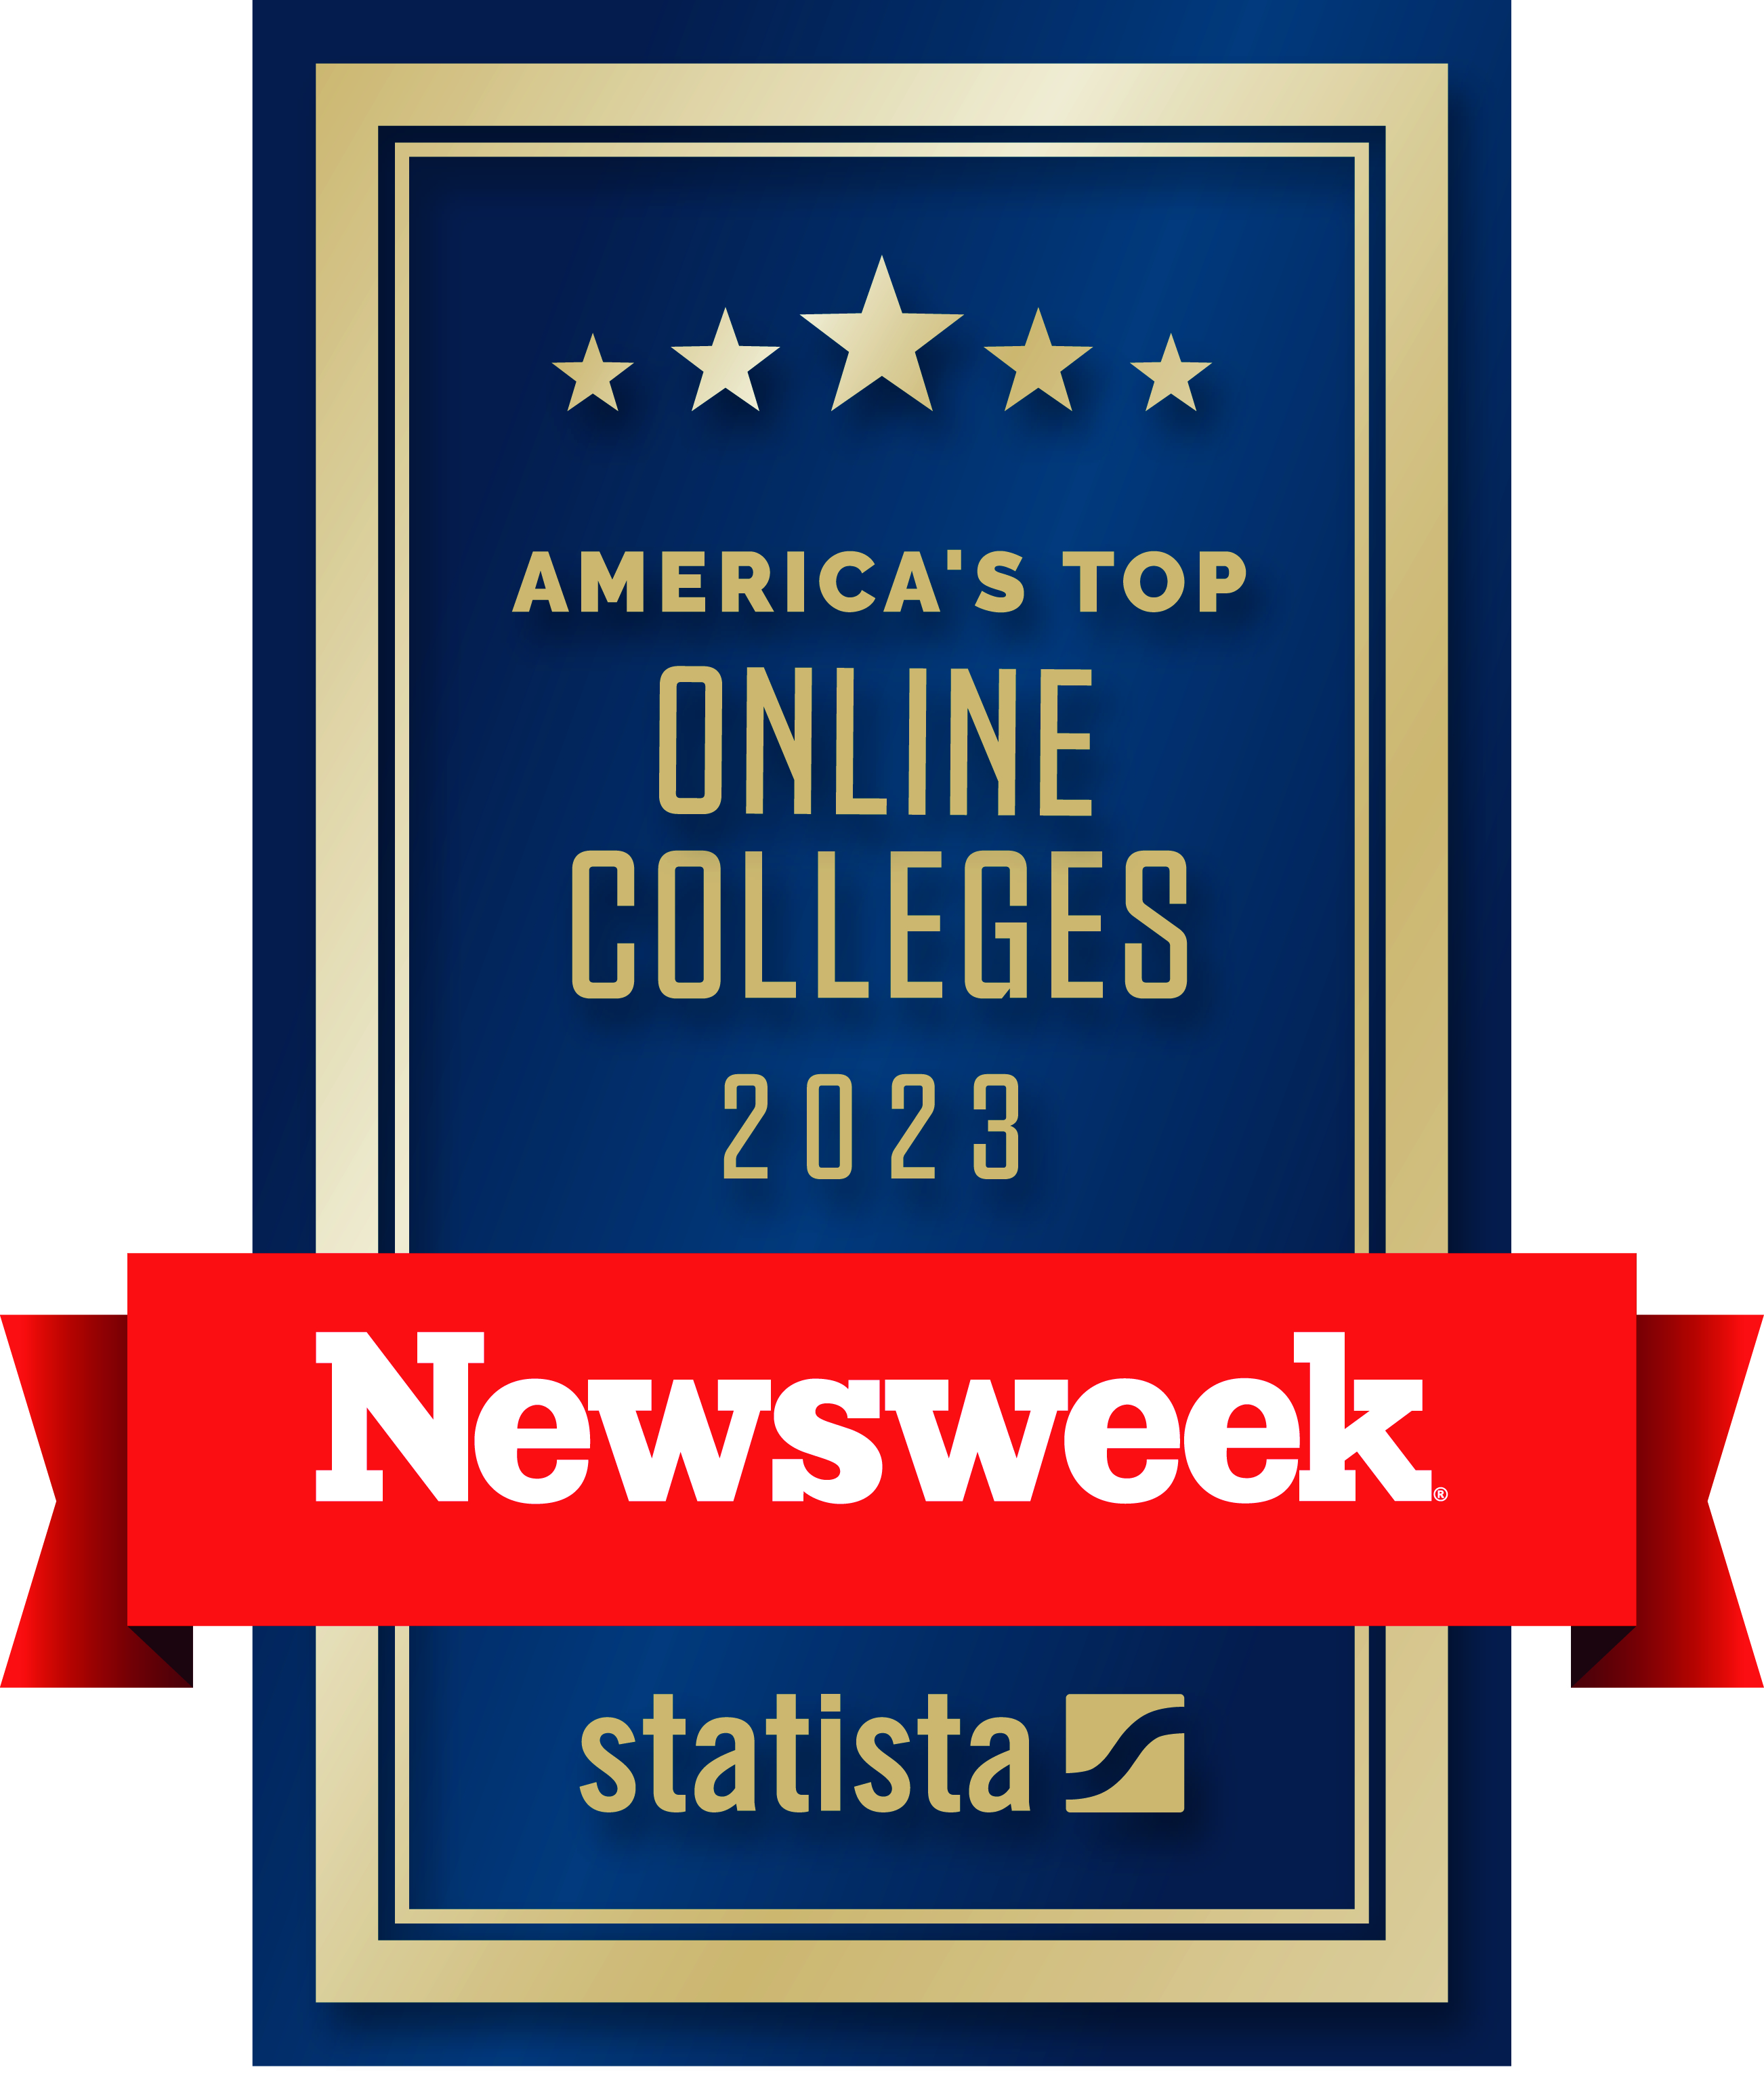 Newsweek - America's Top Online Colleges